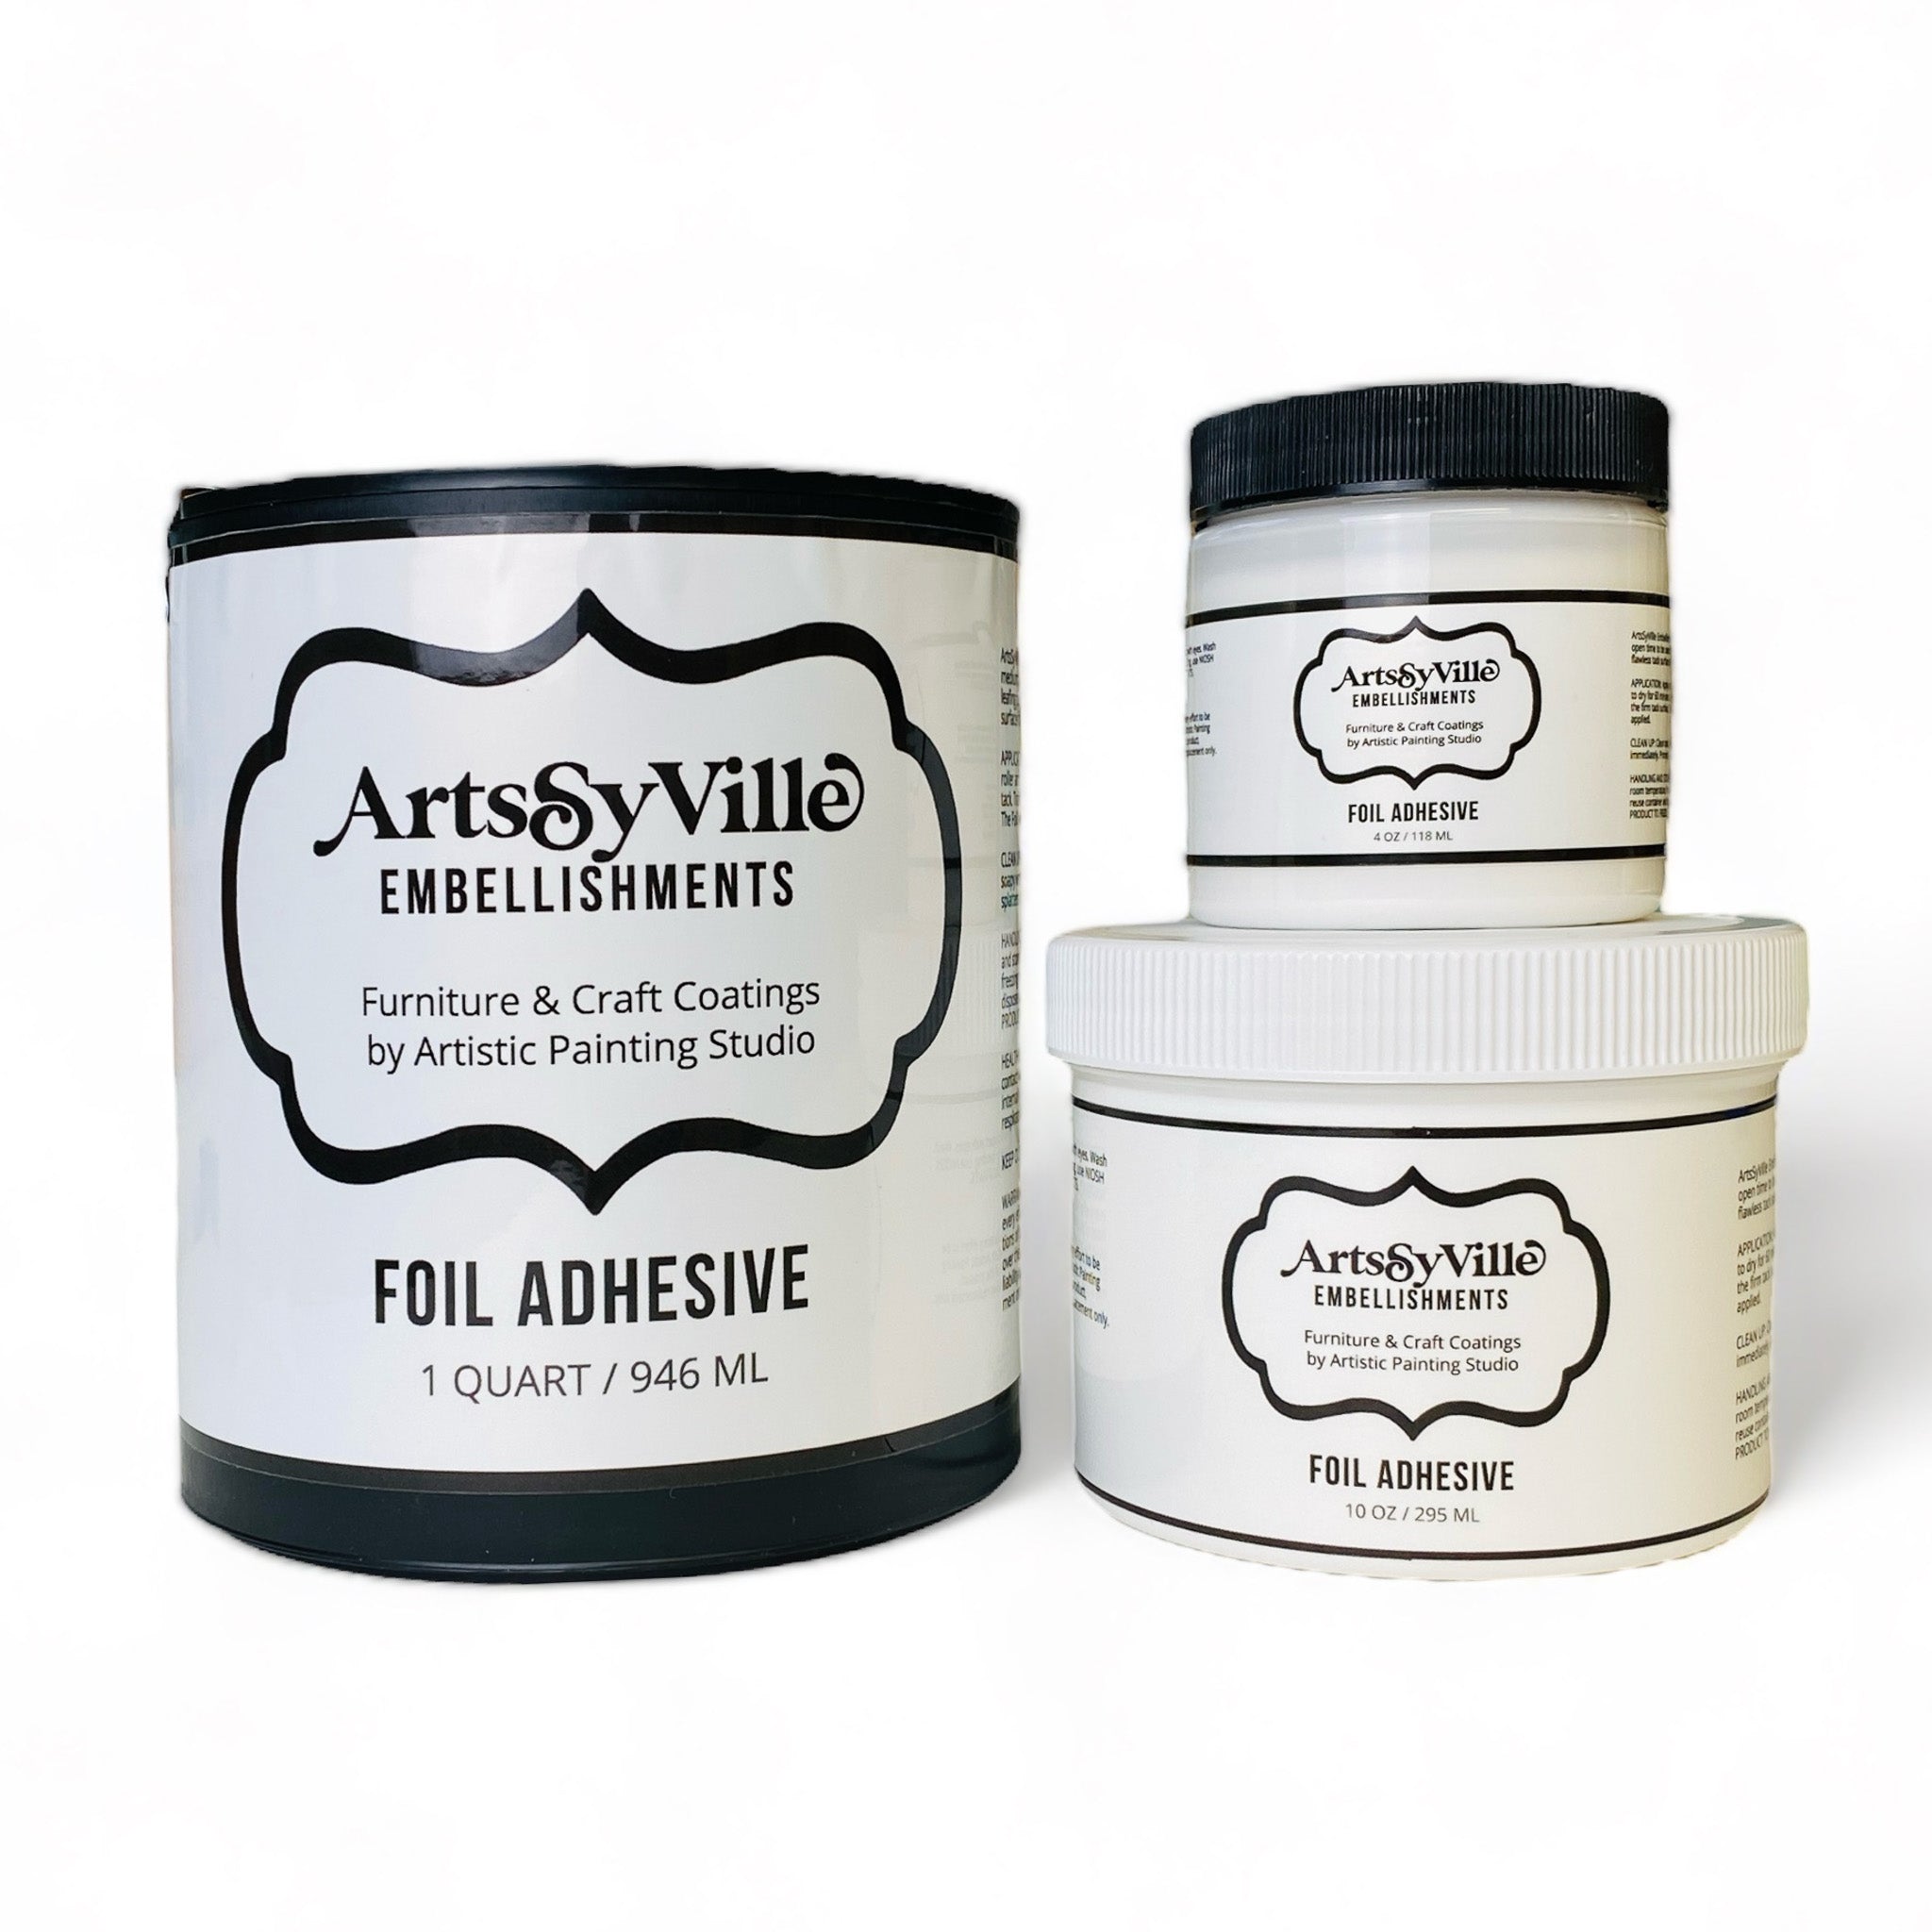 Three containers (1 quart, 10 ounce, and 4 ounce) of Artistic Painting Studio's Foil Adhesive are against a white background. 